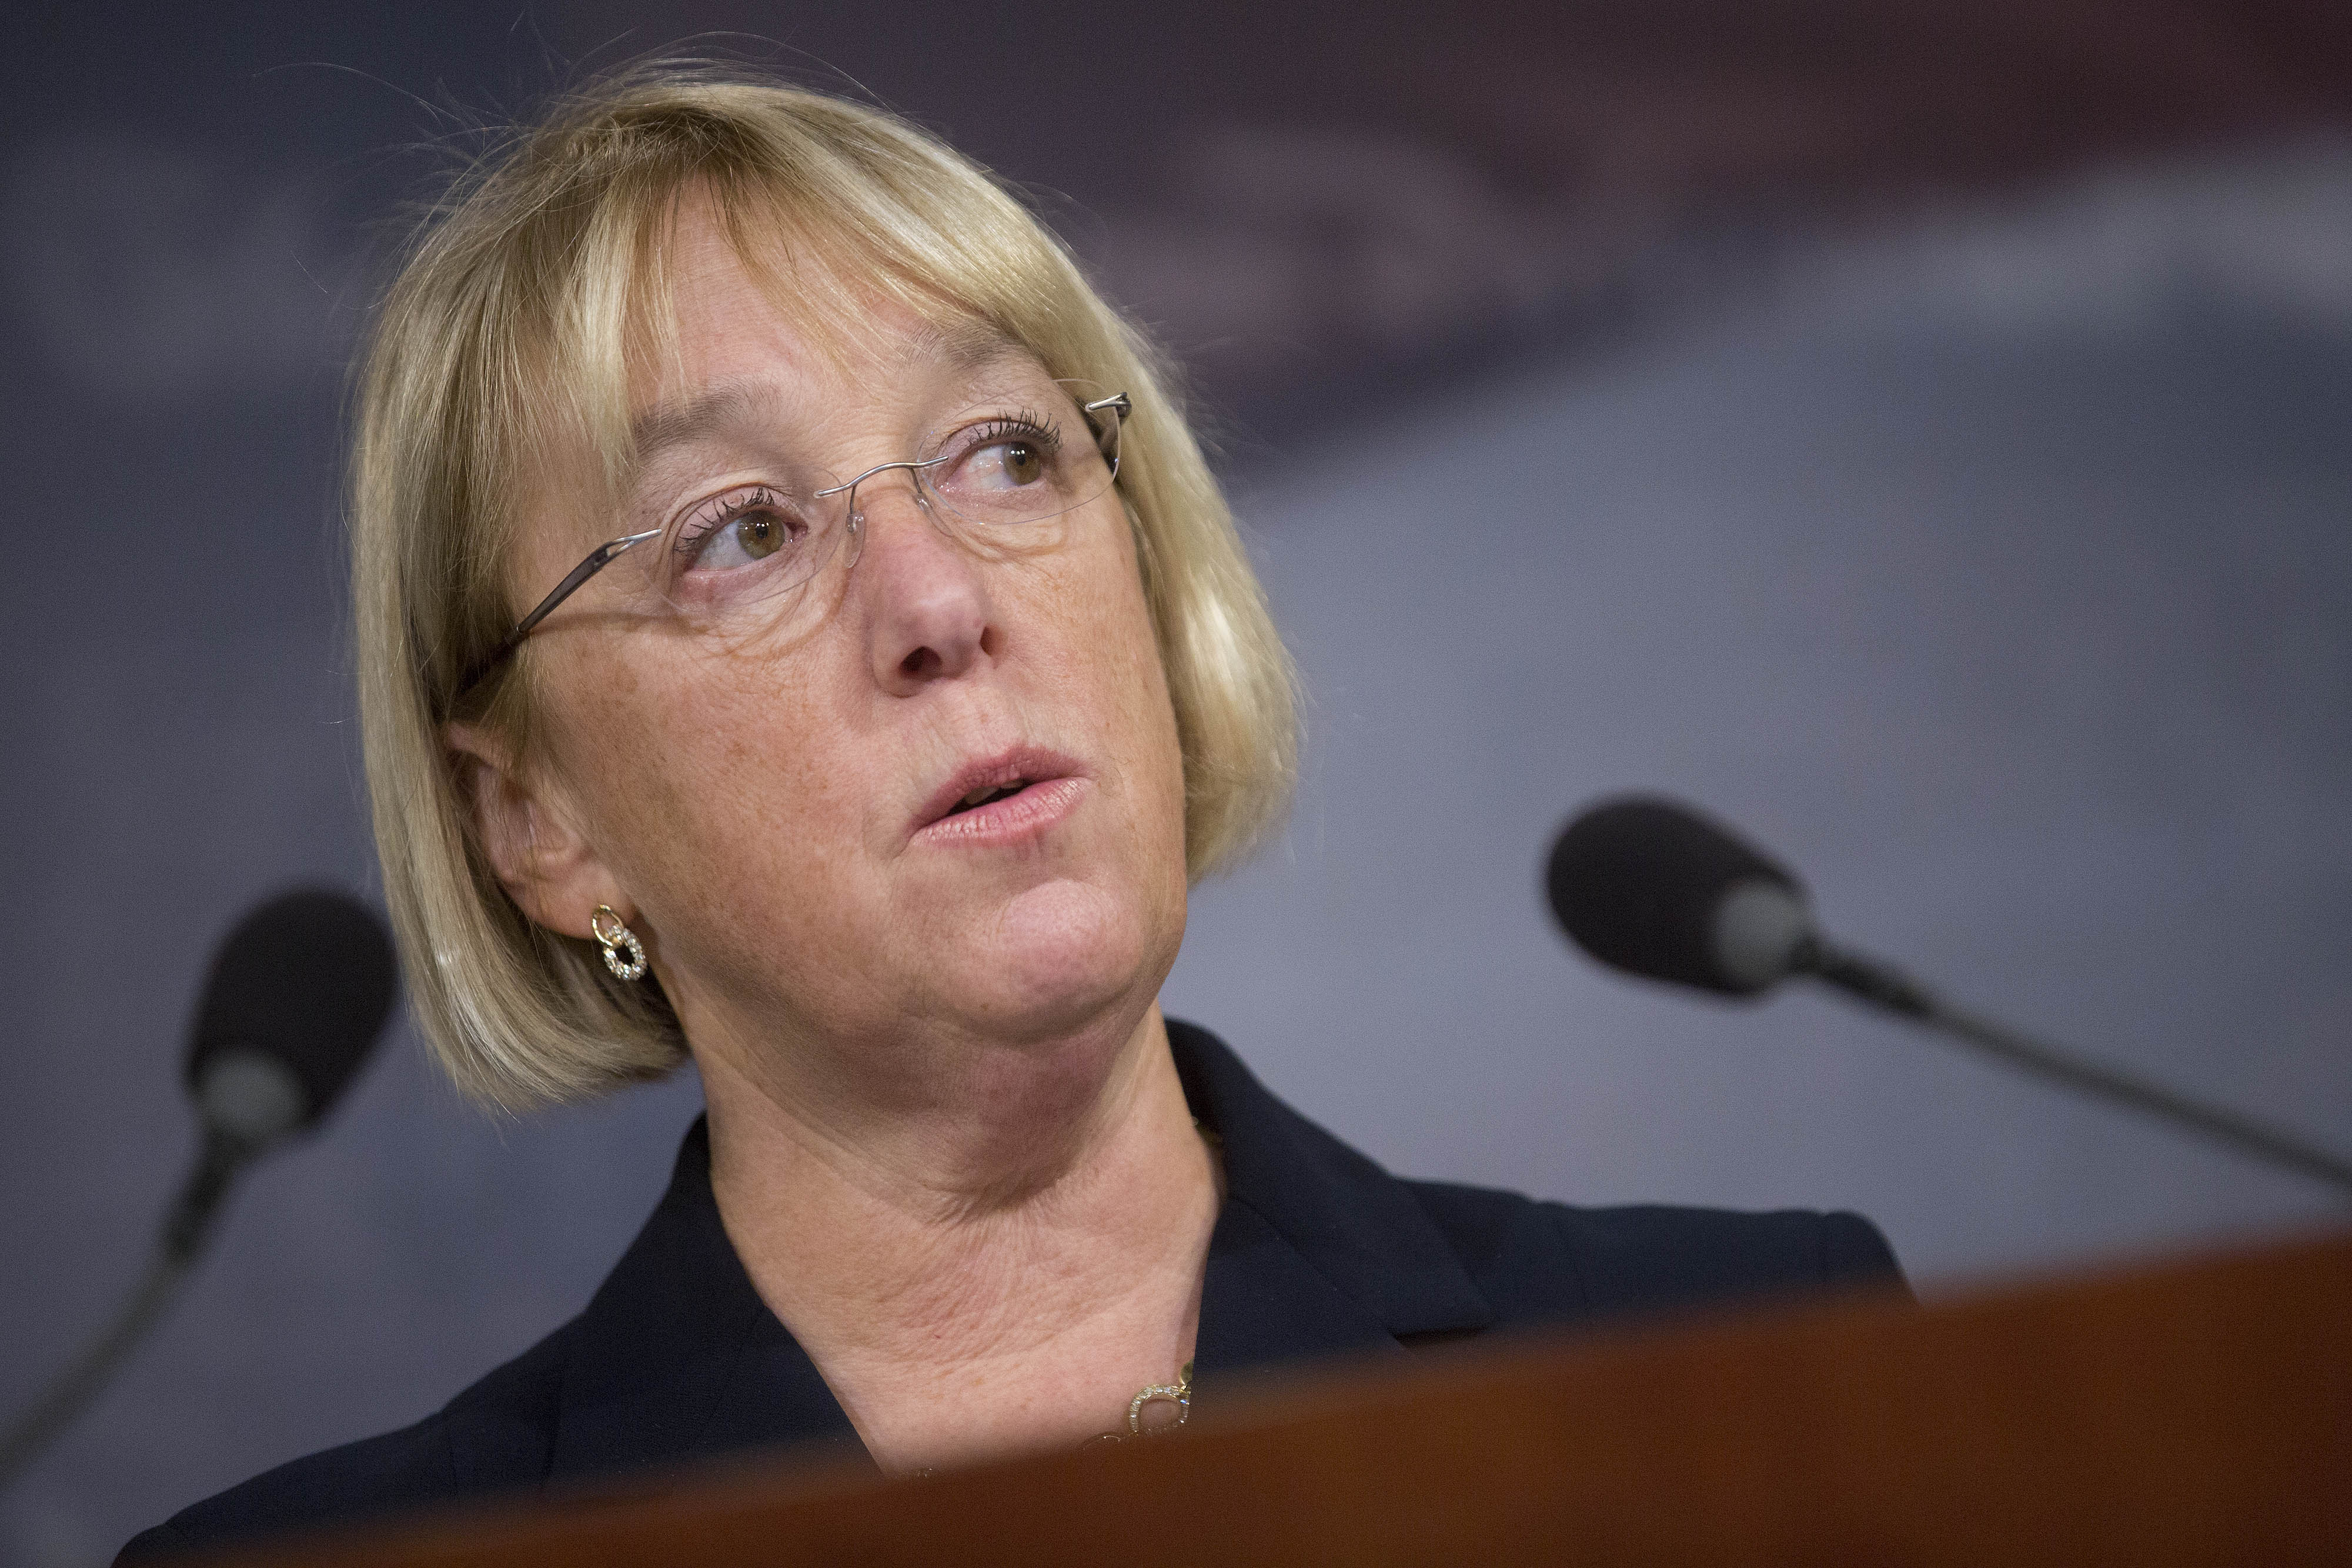 Sen. Patty Murray (D-Wash.), who introduced a bill to increase access to emergency contraception. (Bloomberg—Bloomberg via Getty Images)